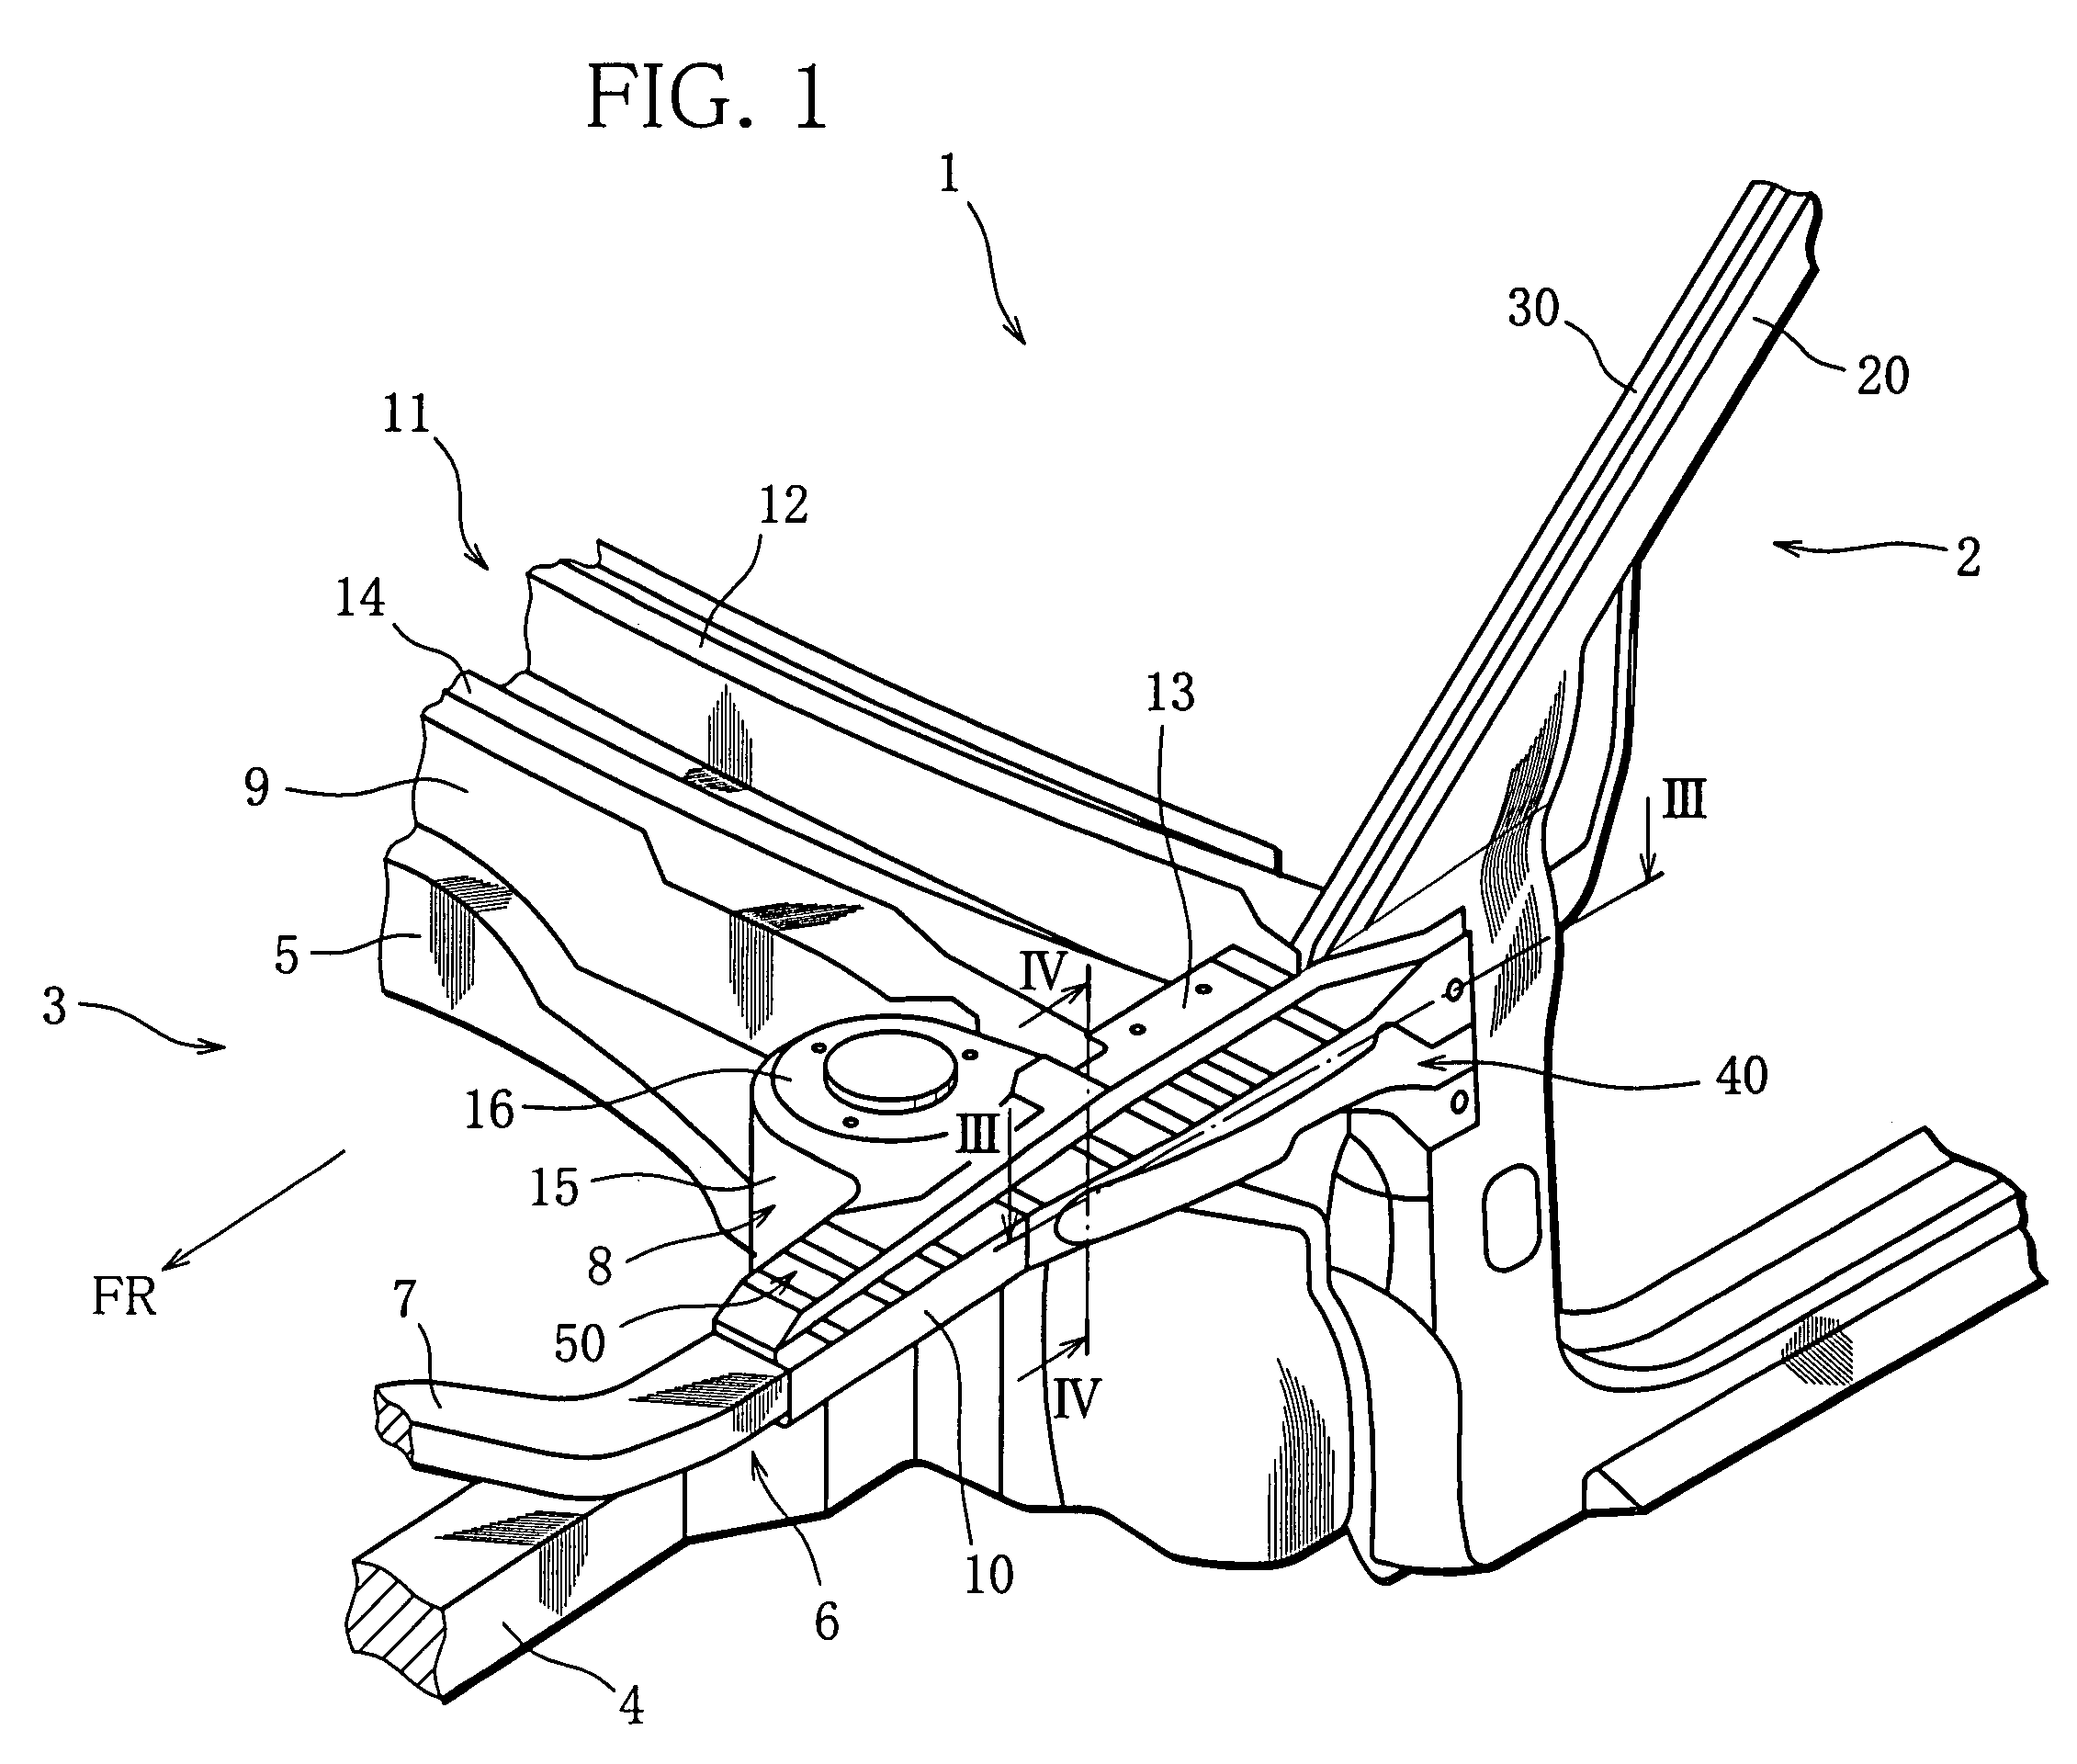 Vehicle body frame structure